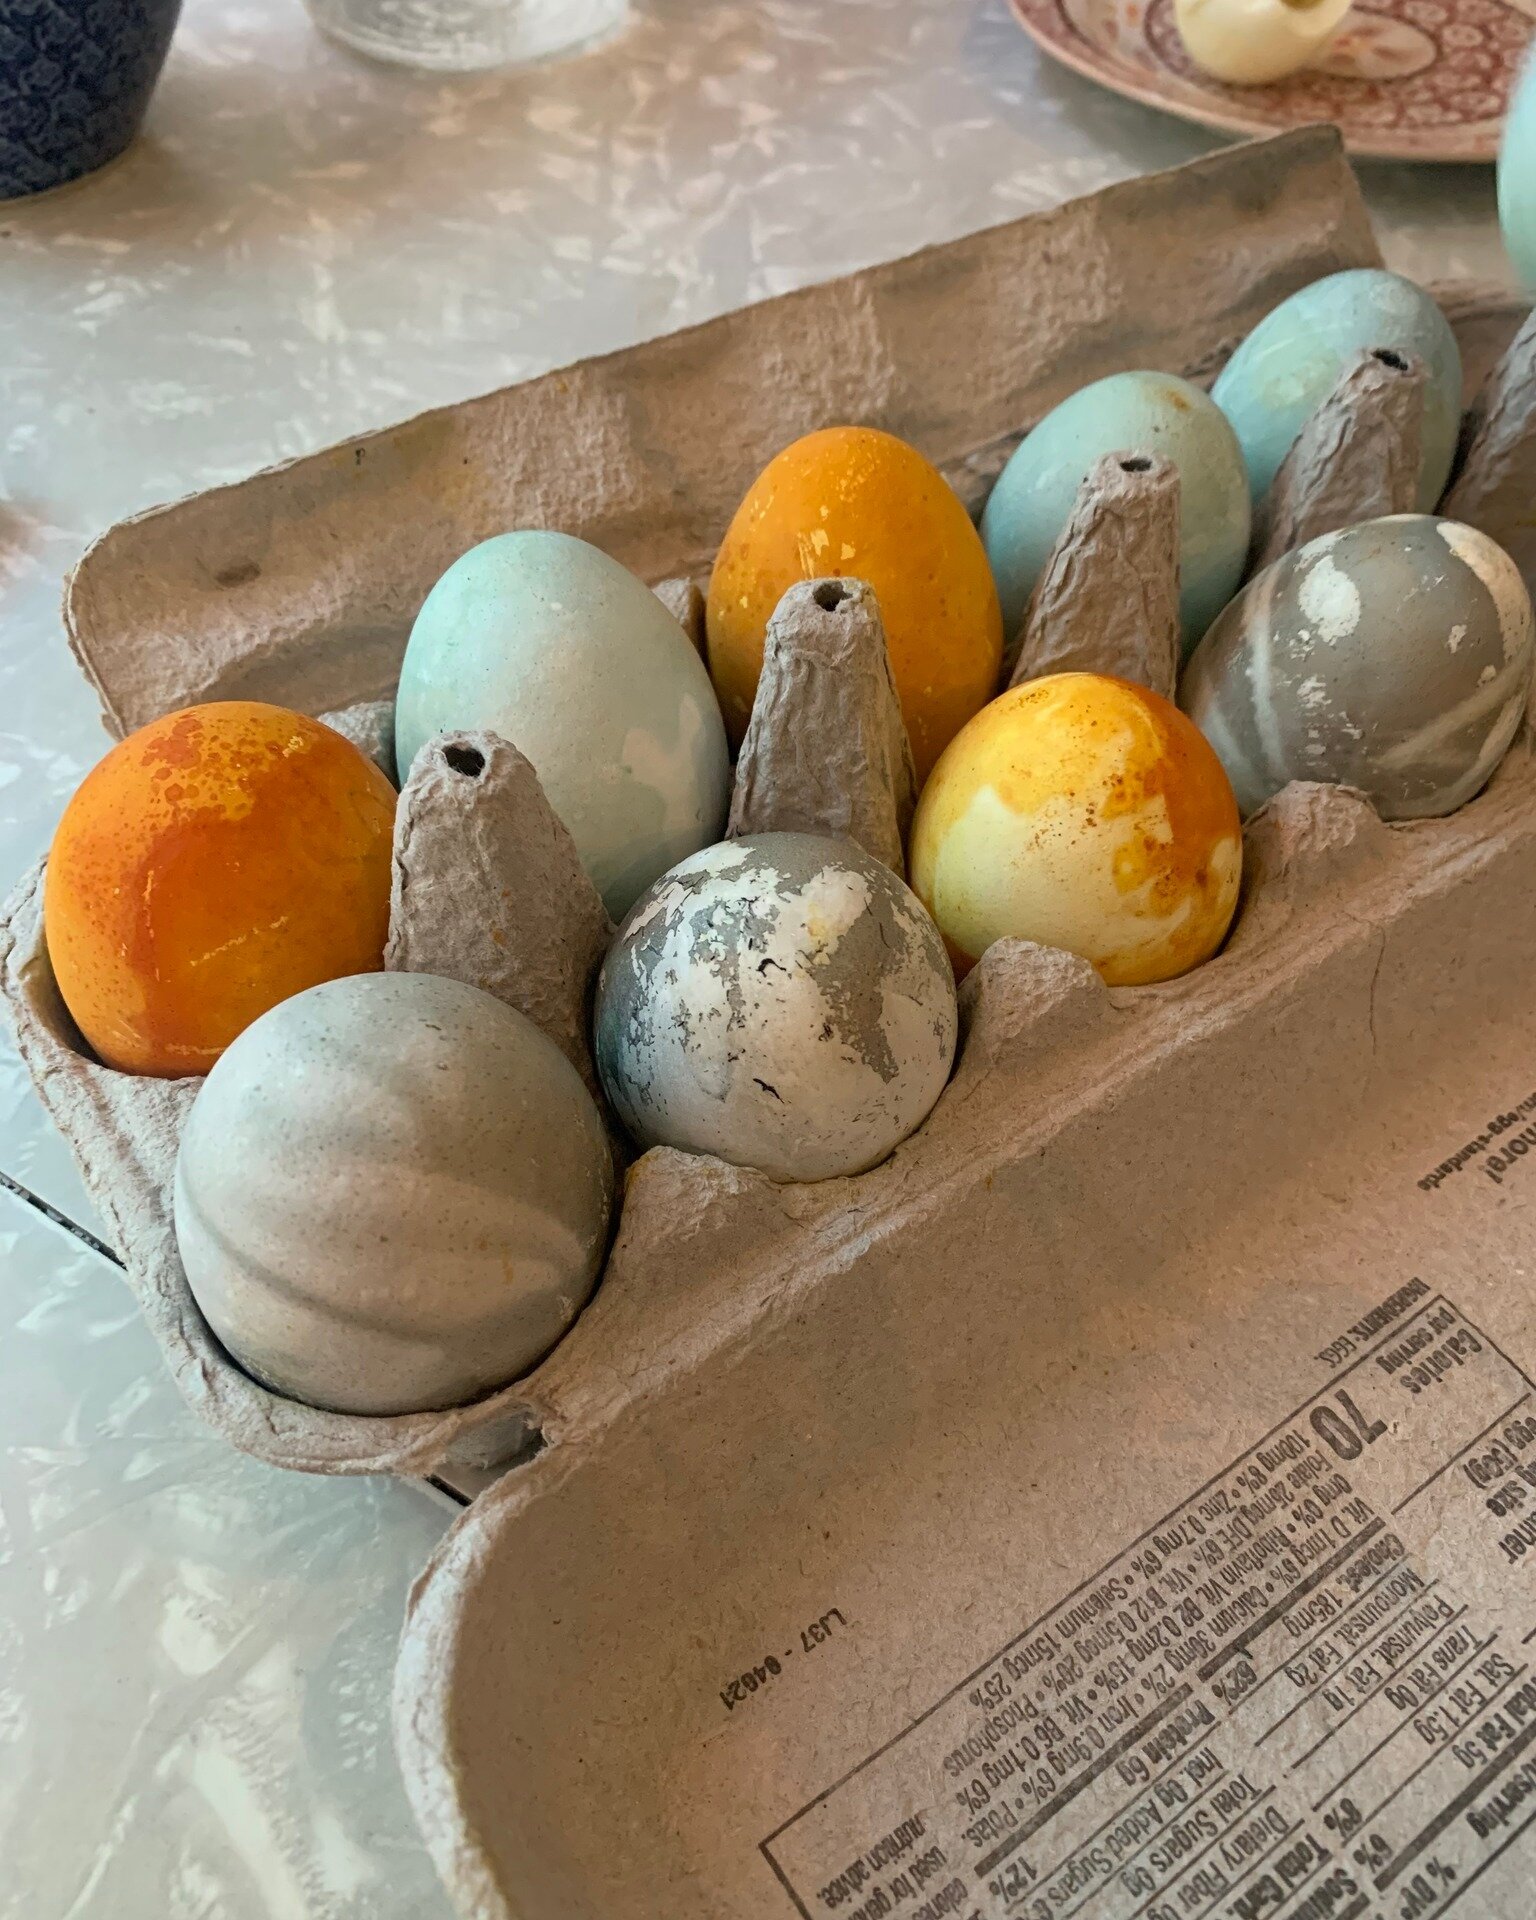 You can compost #eastereggs! 🐣

While it's not required, we'd prefer you use natural dyes. We created these eggs using turmeric, purple cabbage, and blueberries! Check out our 🐰 stories highlight for more #sustainable #easter + #spring celebration 